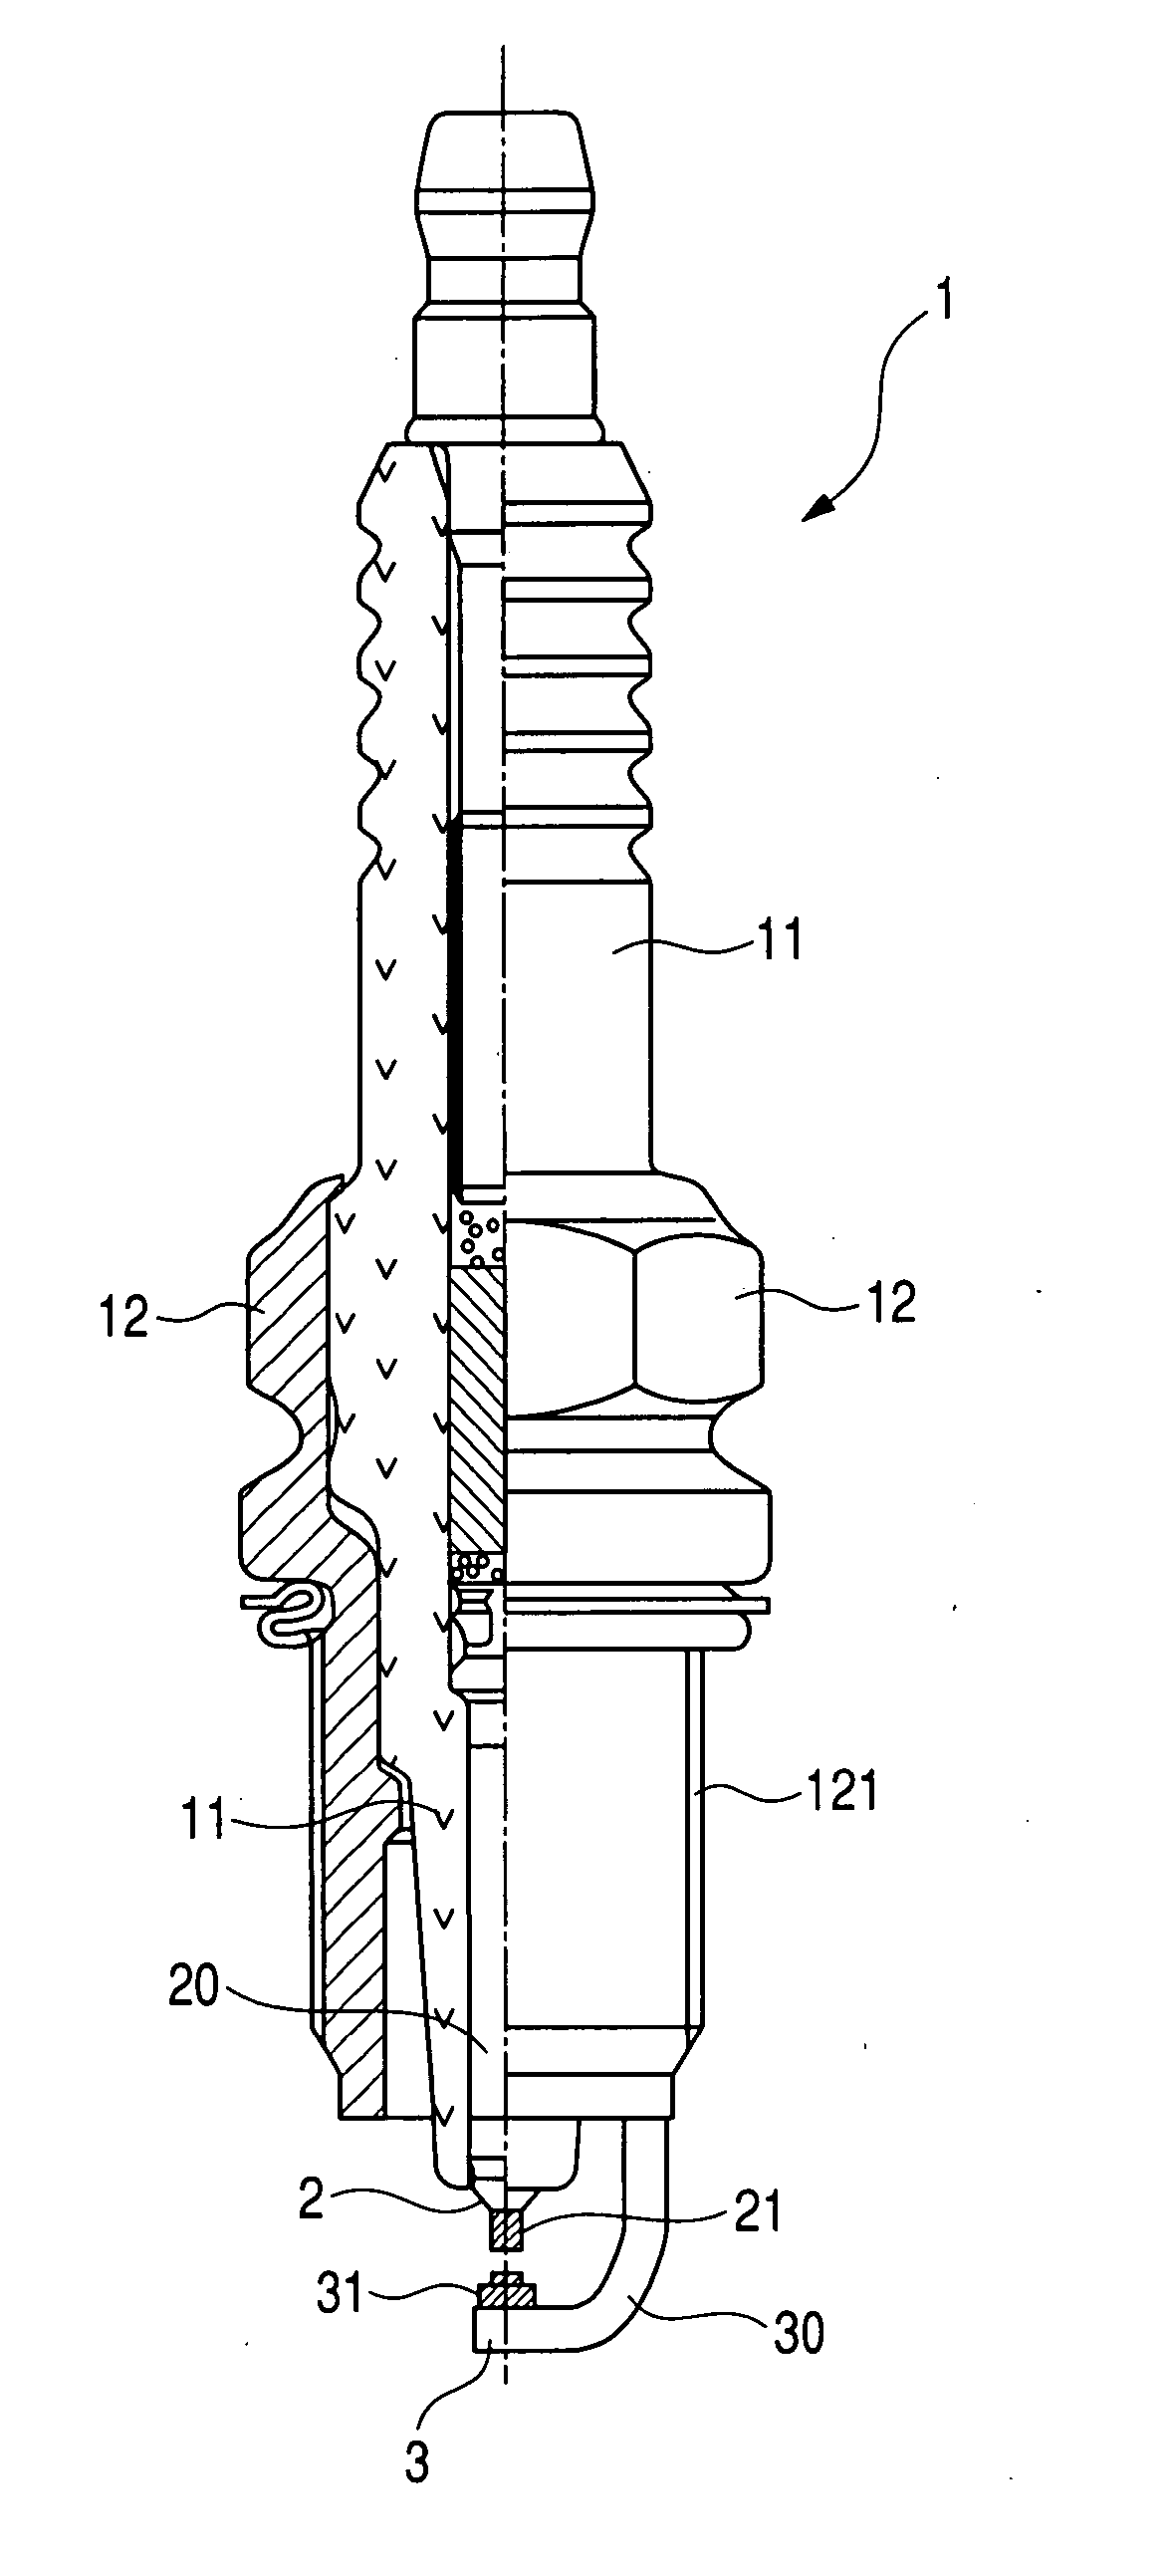 Spark plug for internal combustion engine designed to keep ignitability of fuel high